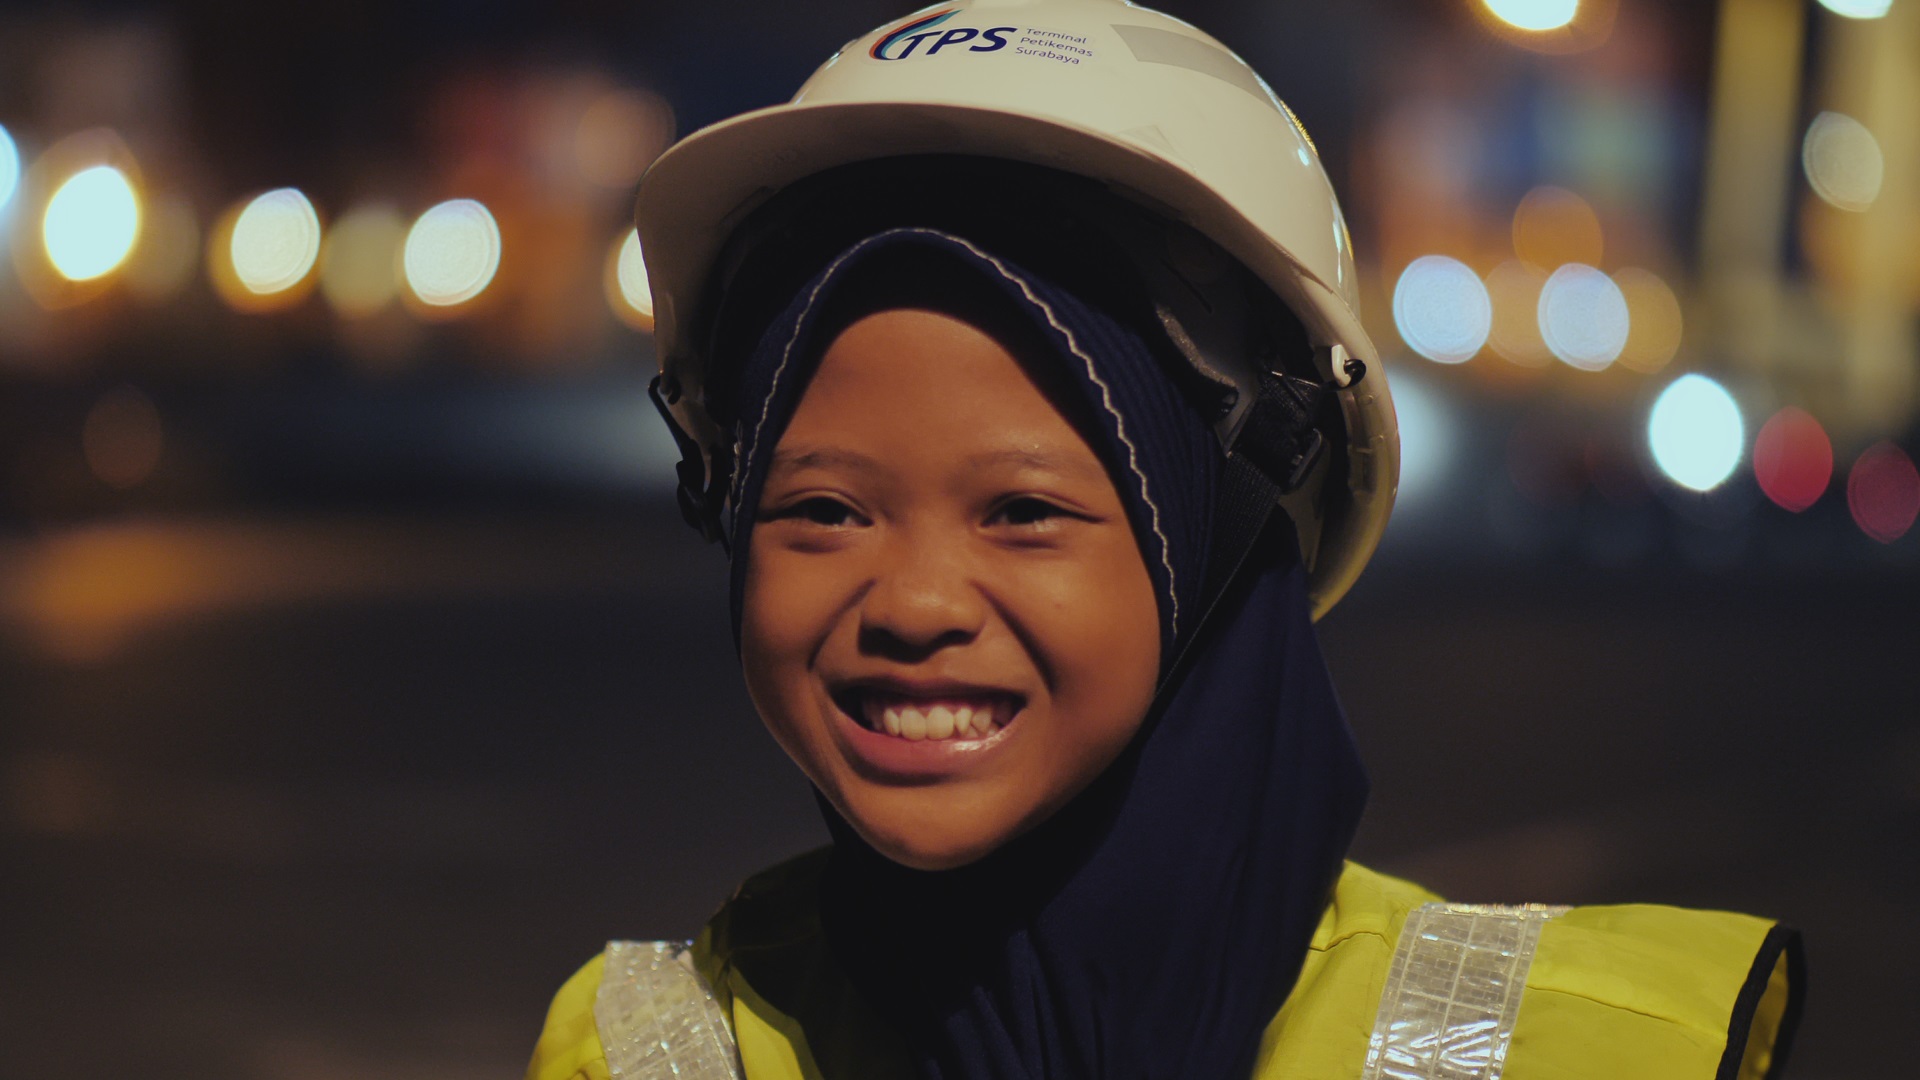 Young girl in hard hat smiling